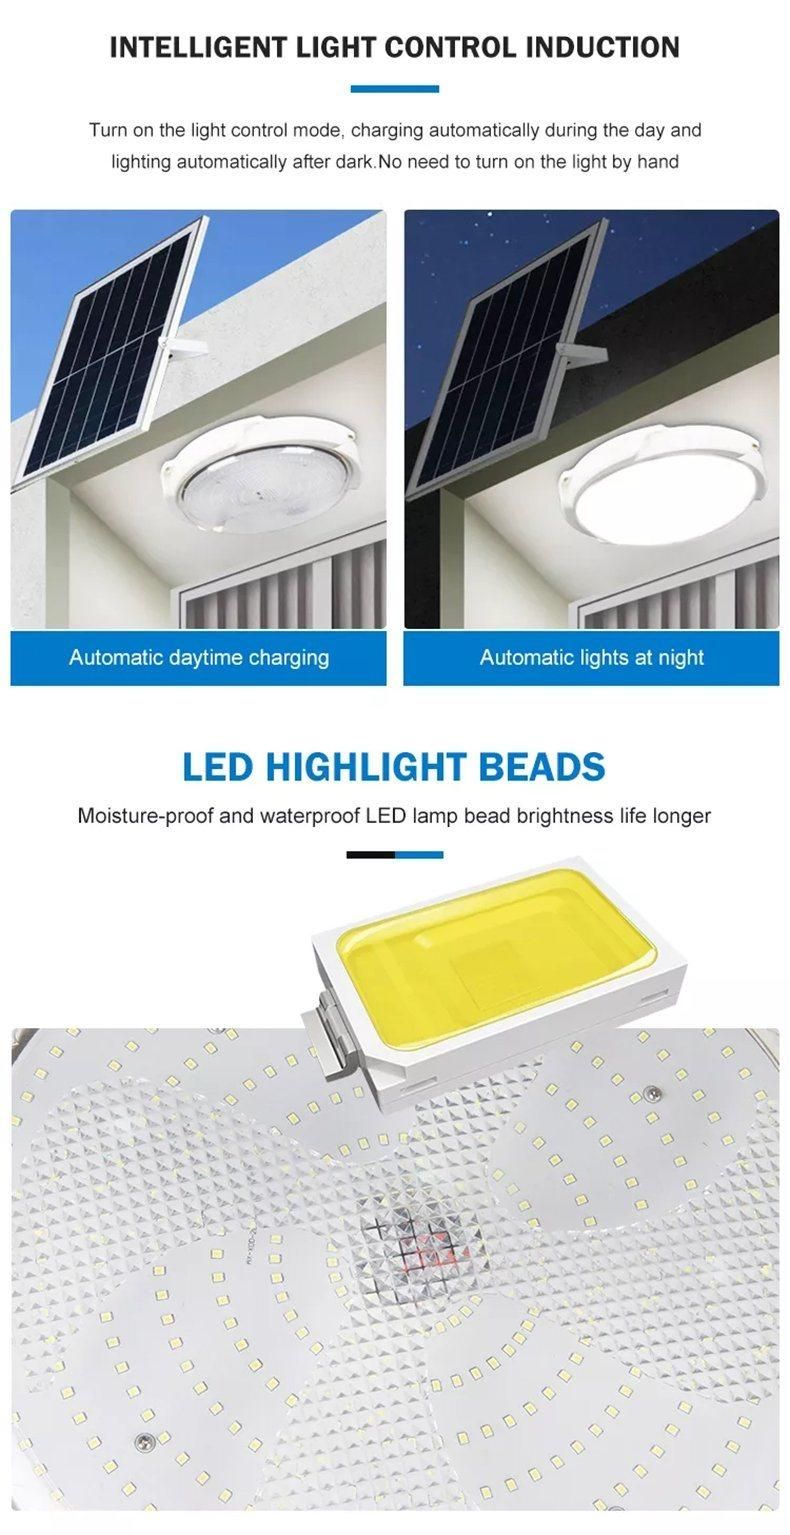 40W 60W Solar Lamps Super Bright Hotel Lights Home ABS Intelligent Control IP66 Waterproof 50W Solar Ceiling Light LED